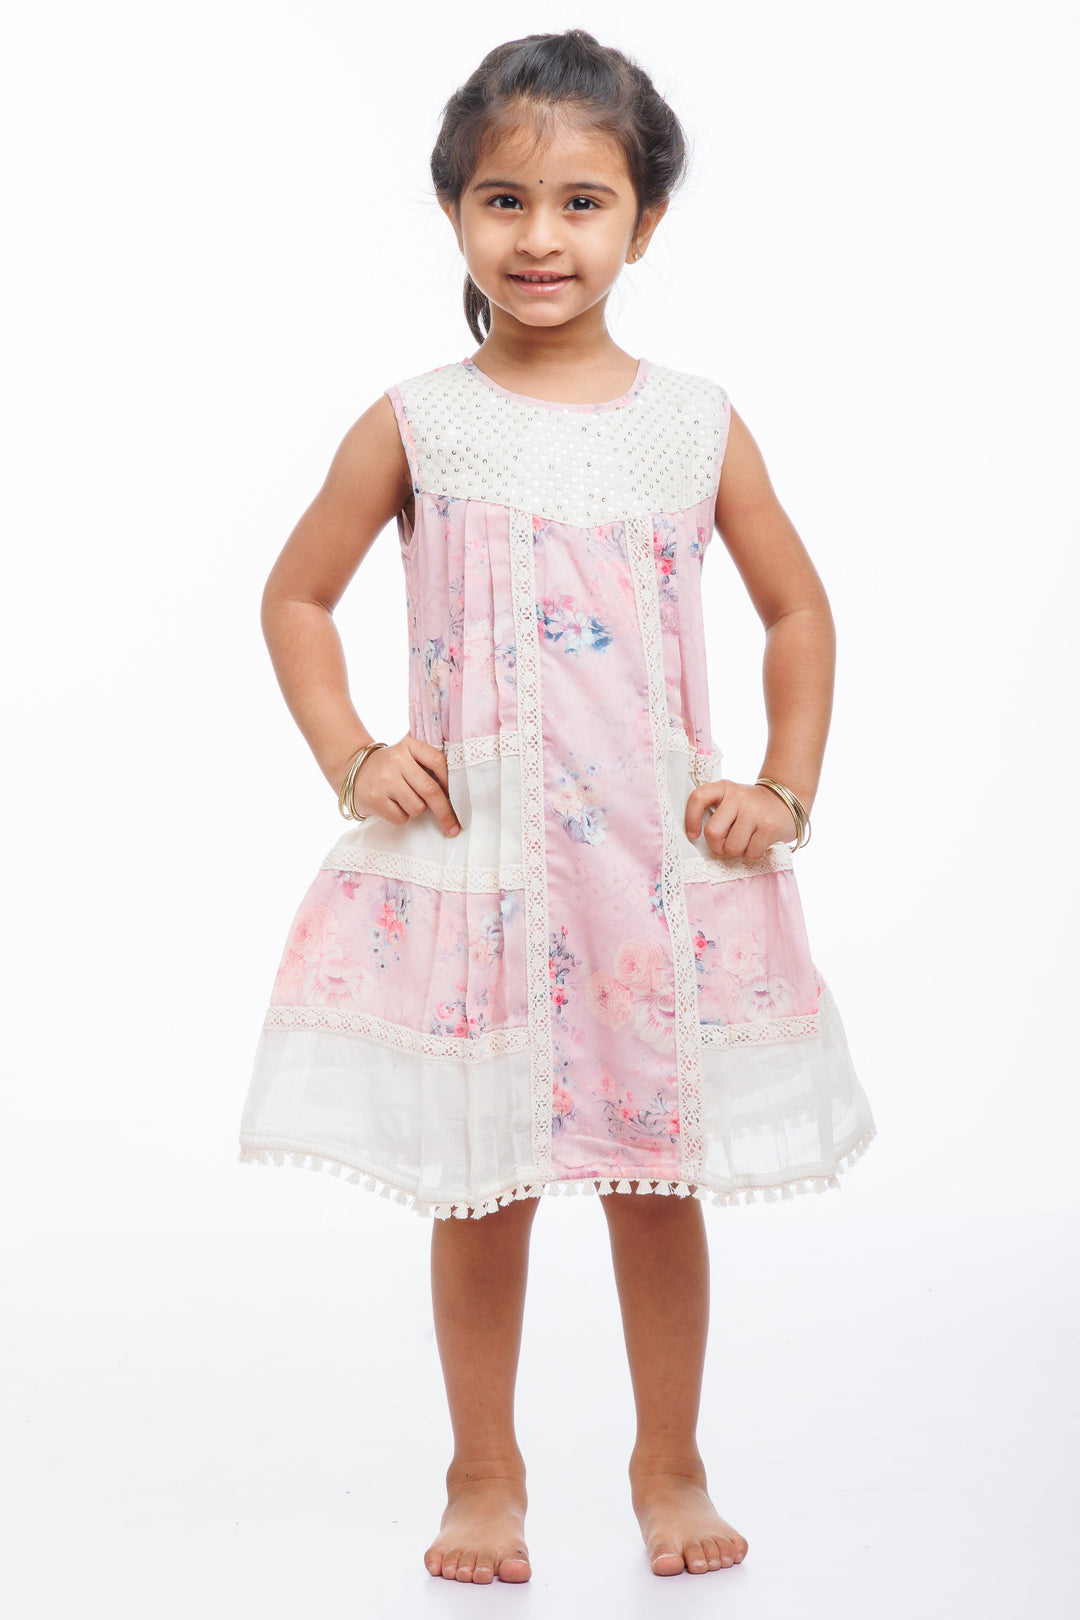 The Nesavu Girls Fancy Frock Enchanted Garden: Girls Airy Cotton Frock with Pastel Floral Design Nesavu 22 (4Y) / Pink / Cotton GFC1290A-22 Buy Pastel Floral Cotton Frock for Girls | Perfect for Summer Elegance | The Nesavu